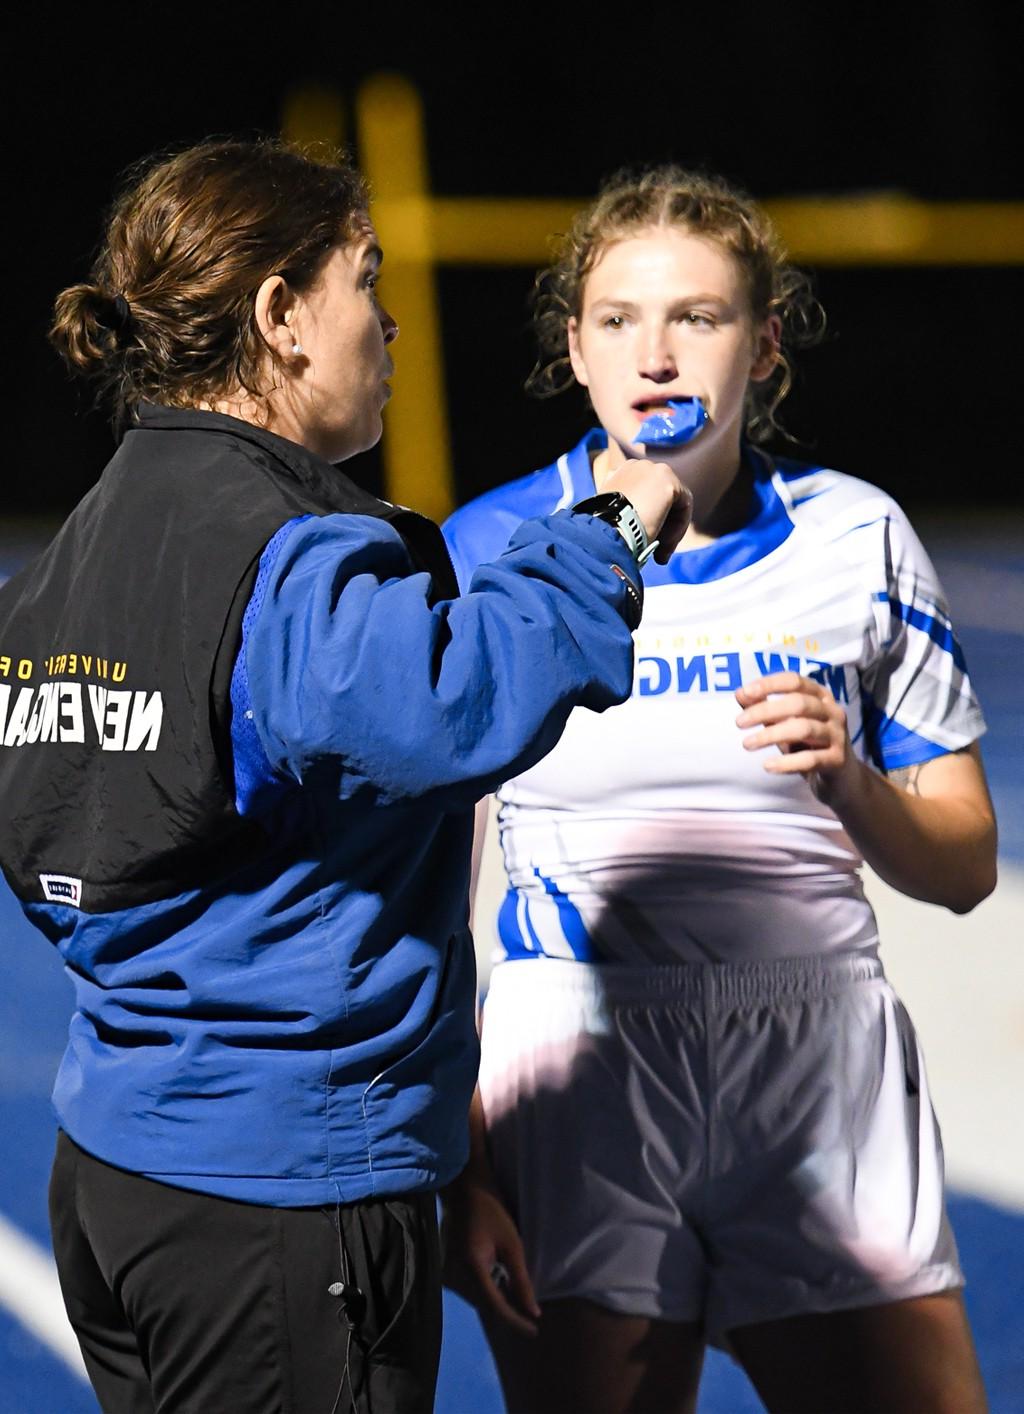 A coach speaks with a field hockey player during a game